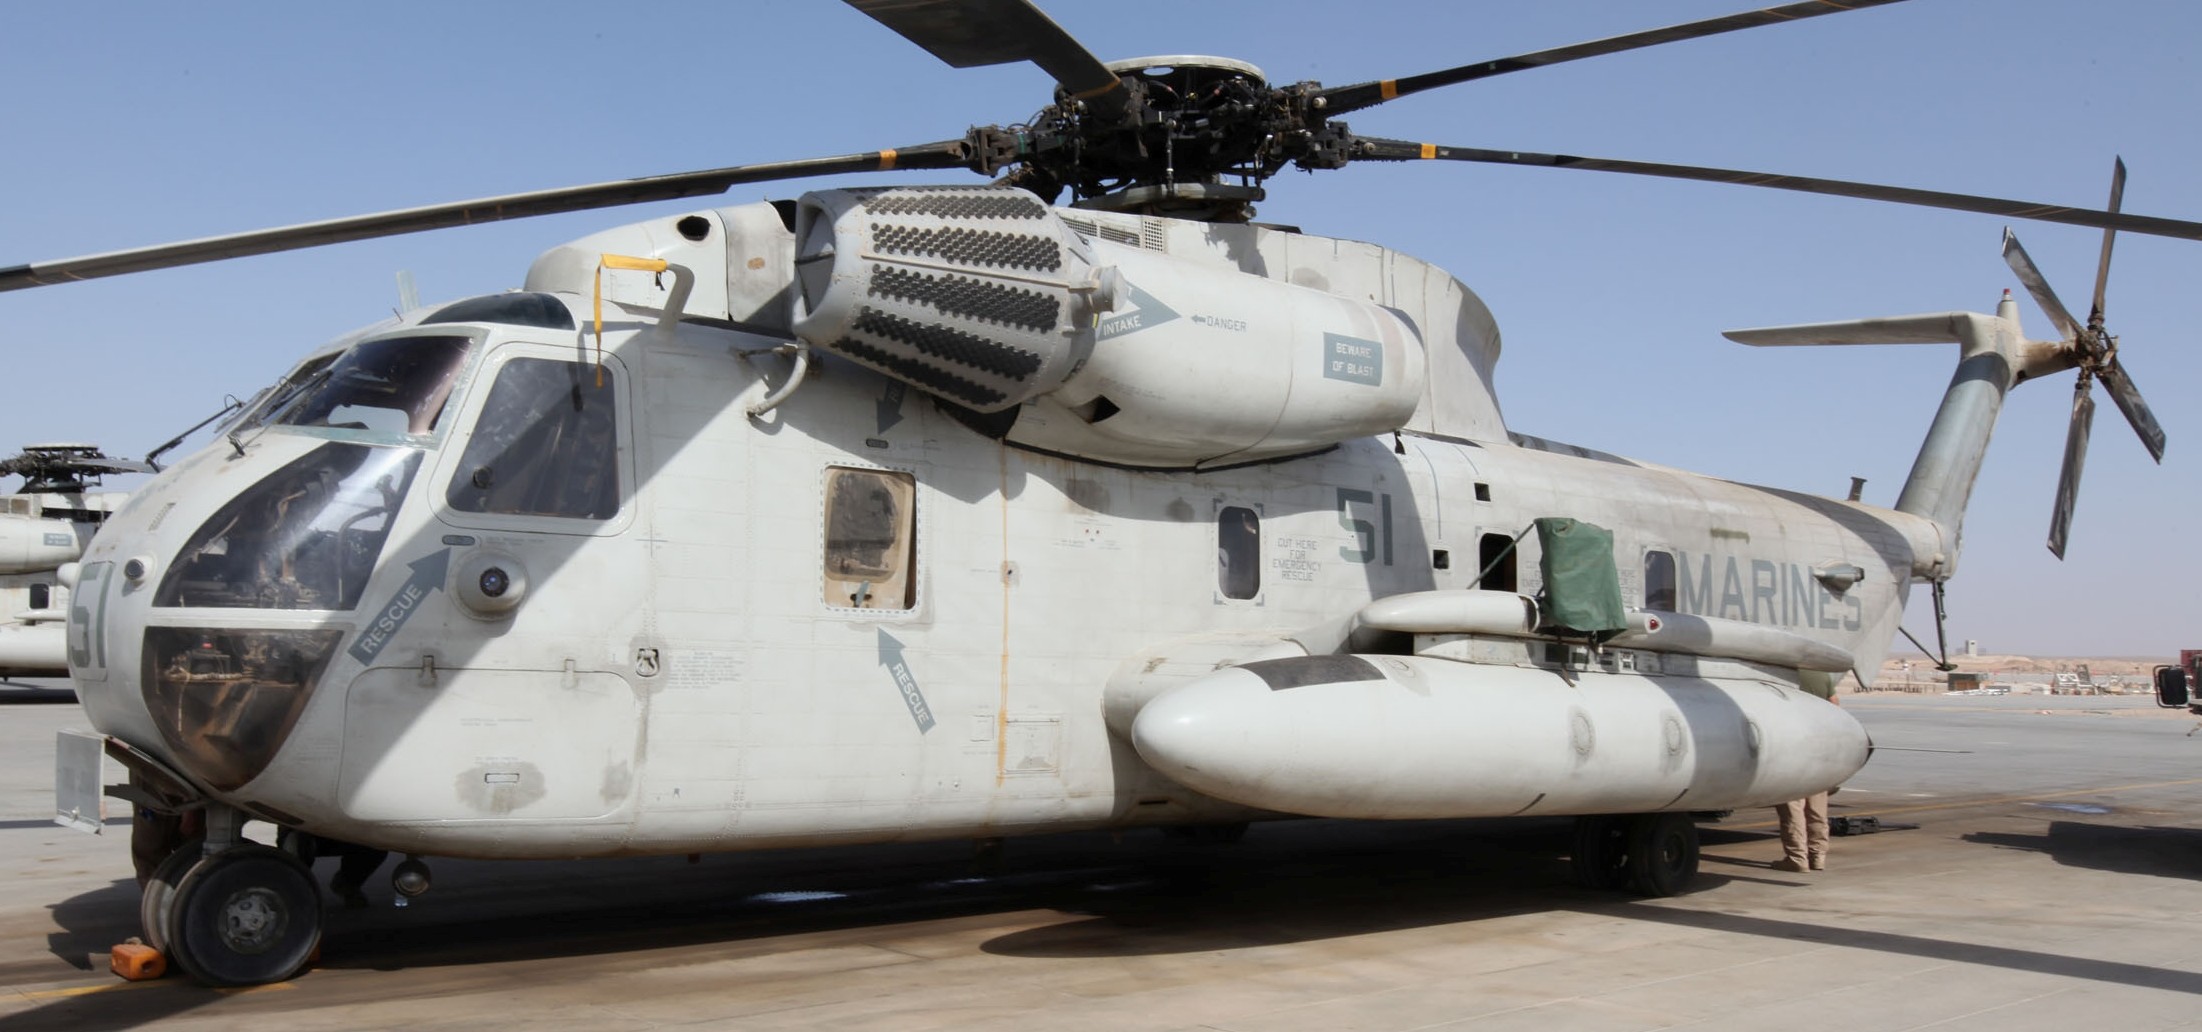 hmh-362 ugly angels marine heavy helicopter squadron usmc sikorsky ch-53d sea stallion 35